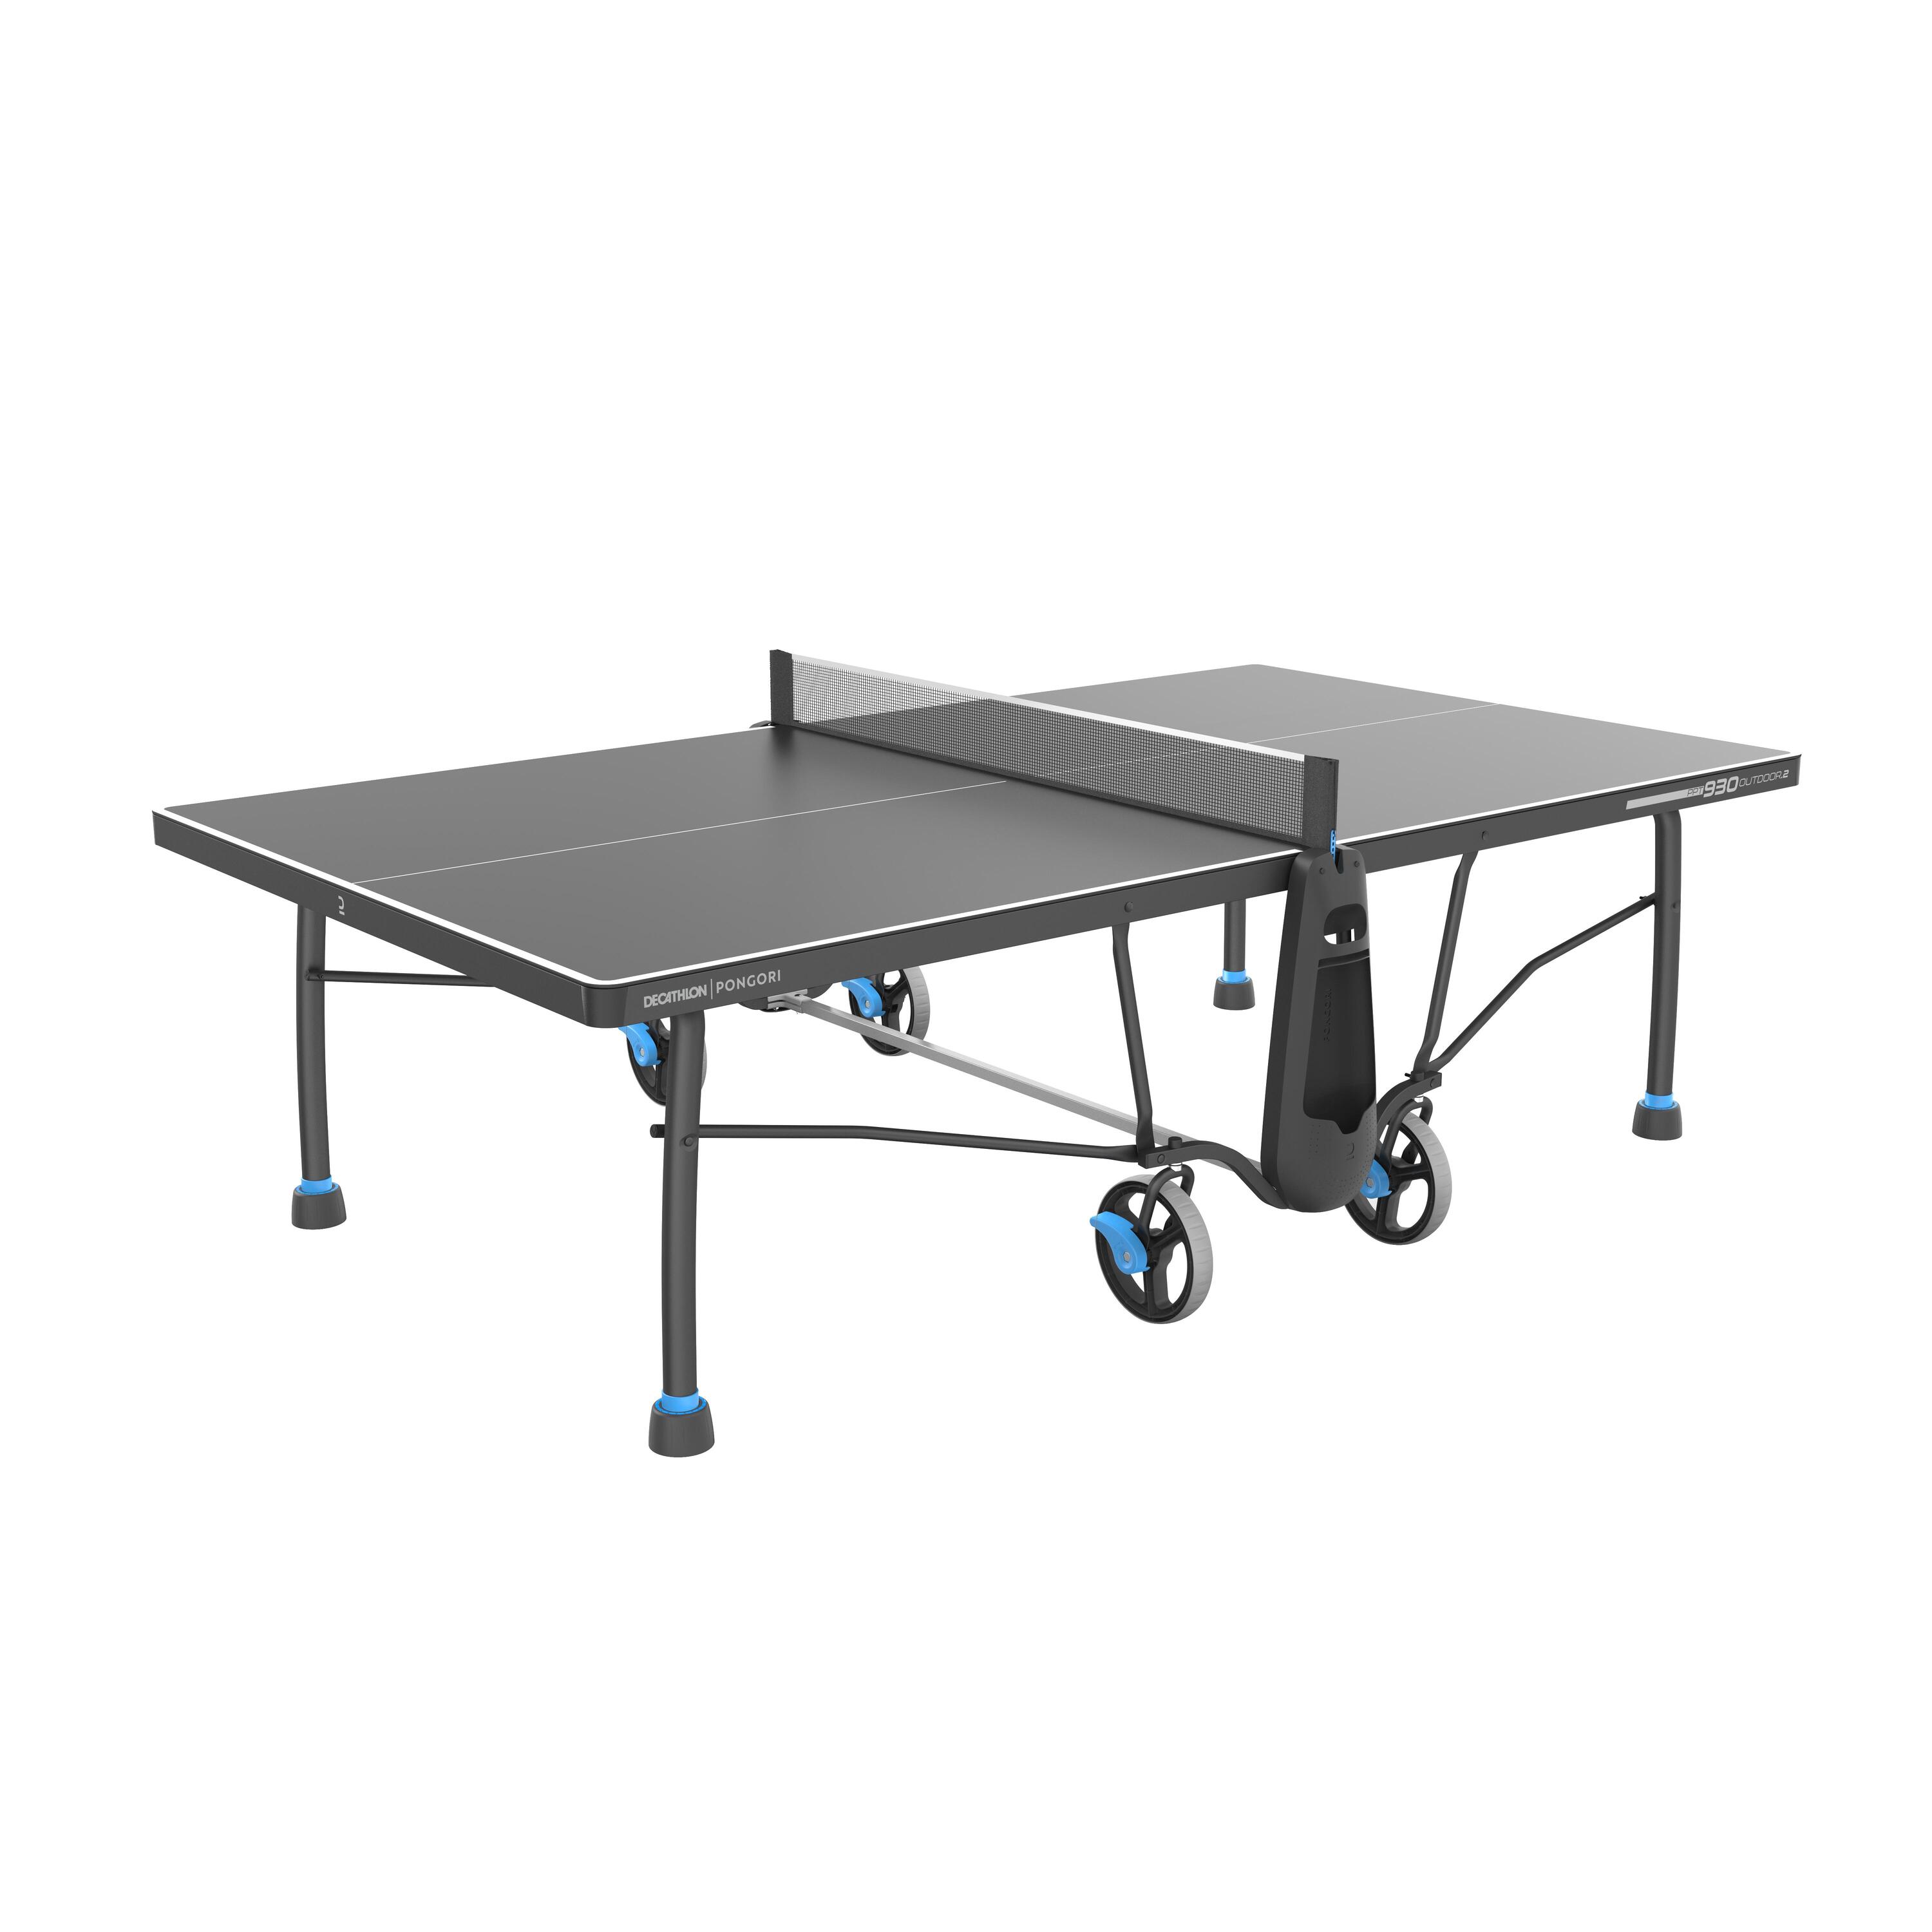 Outdoor Table Tennis Table PPT 930.2 With Cover - Black 2/16